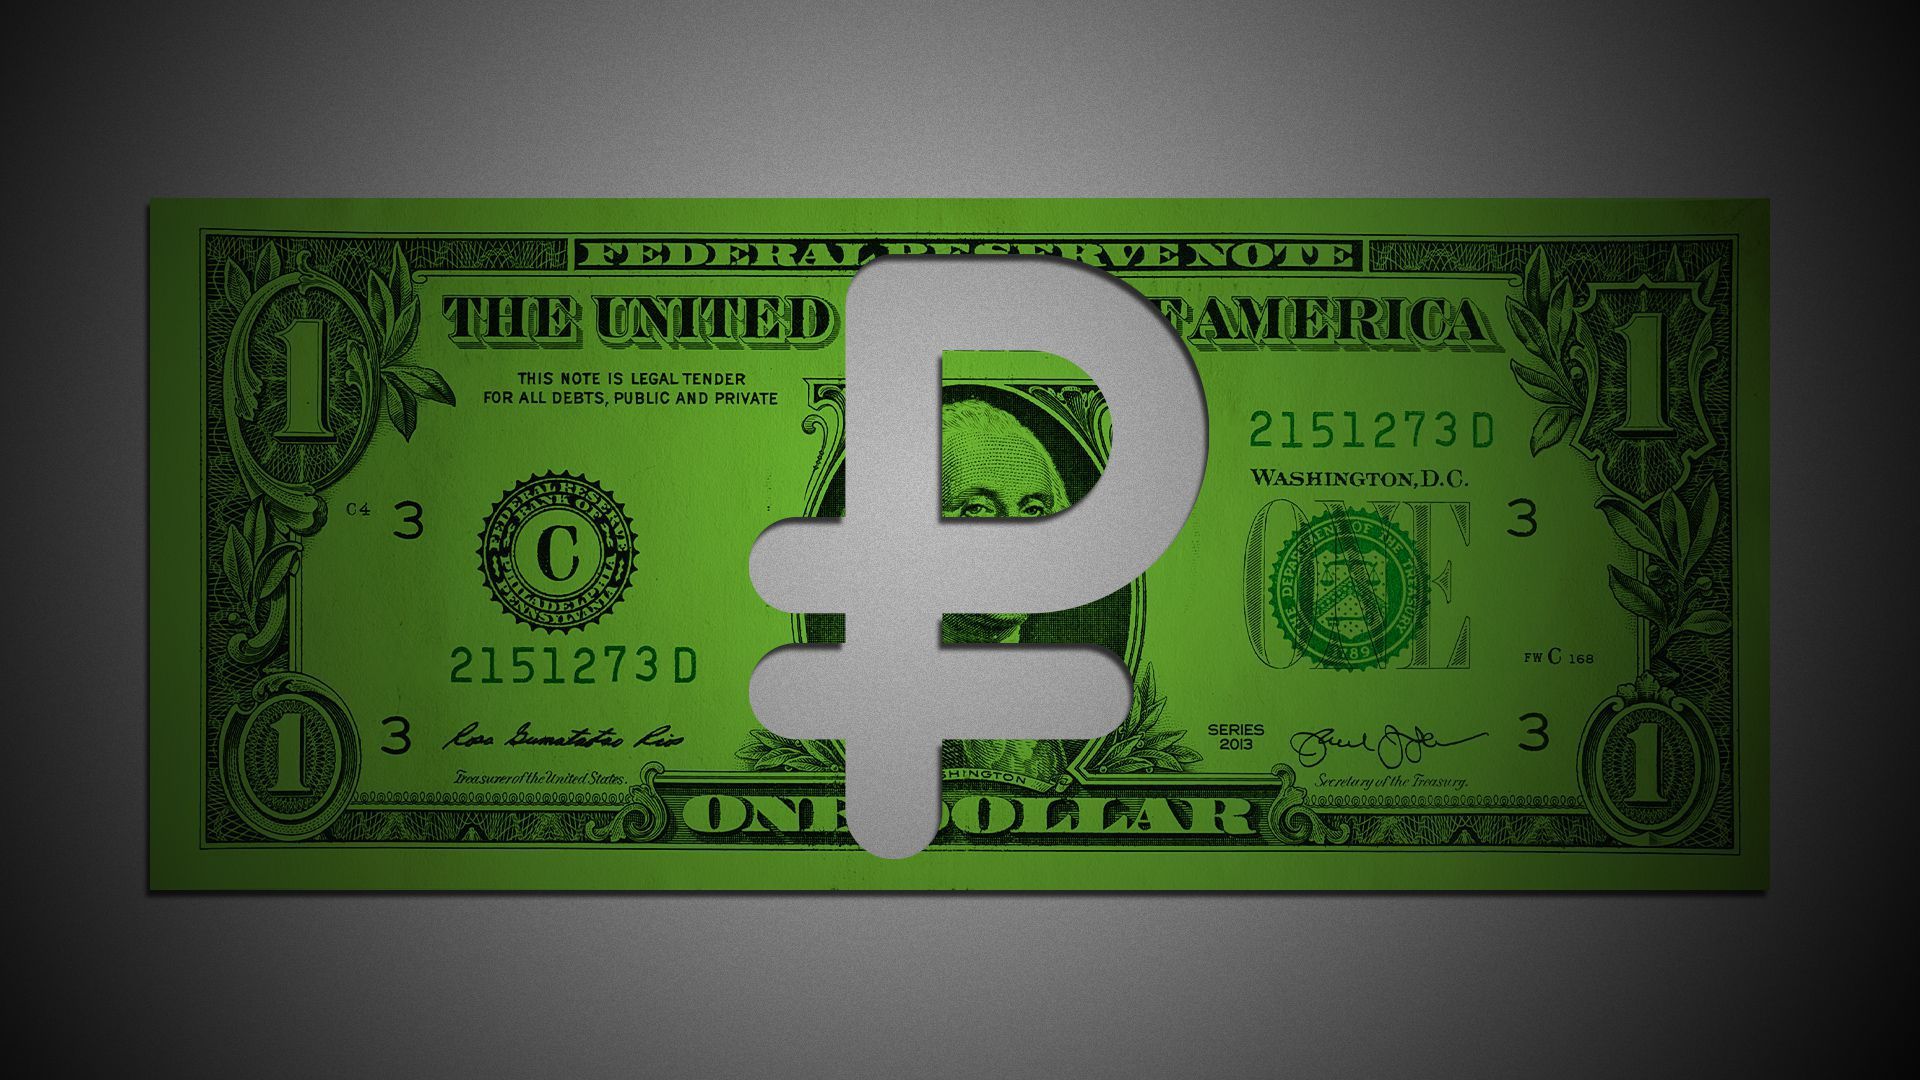 Illustration of the ruble sign over a dollar bill